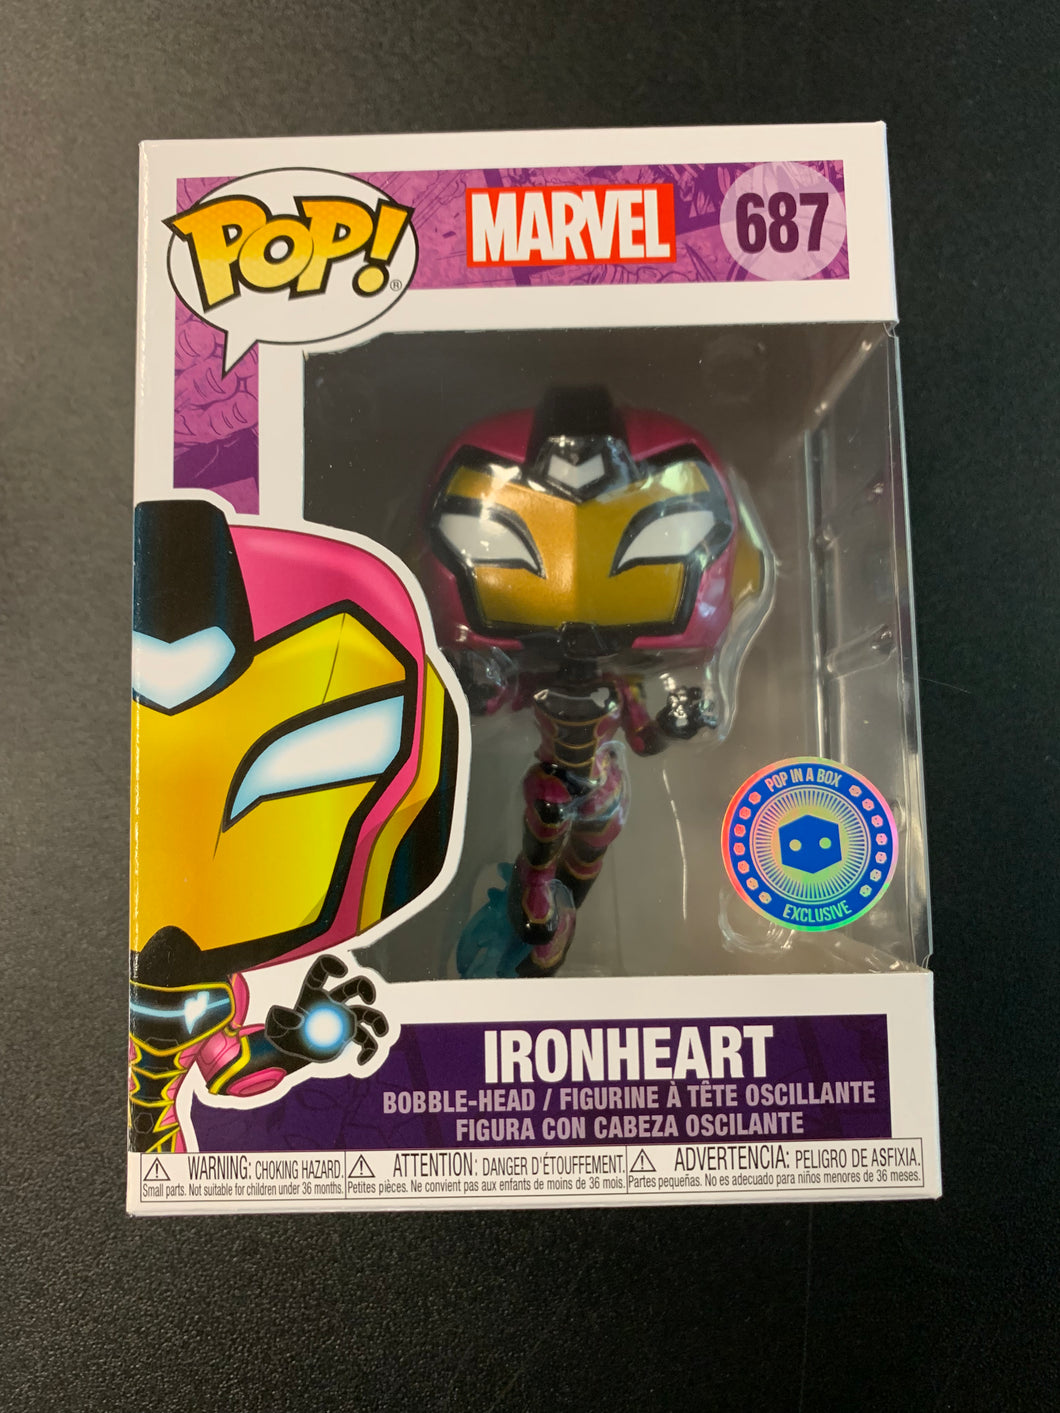 FUNKO POP MARVEL IRONHEART POP IN A BOX EXCLUSIVE 687